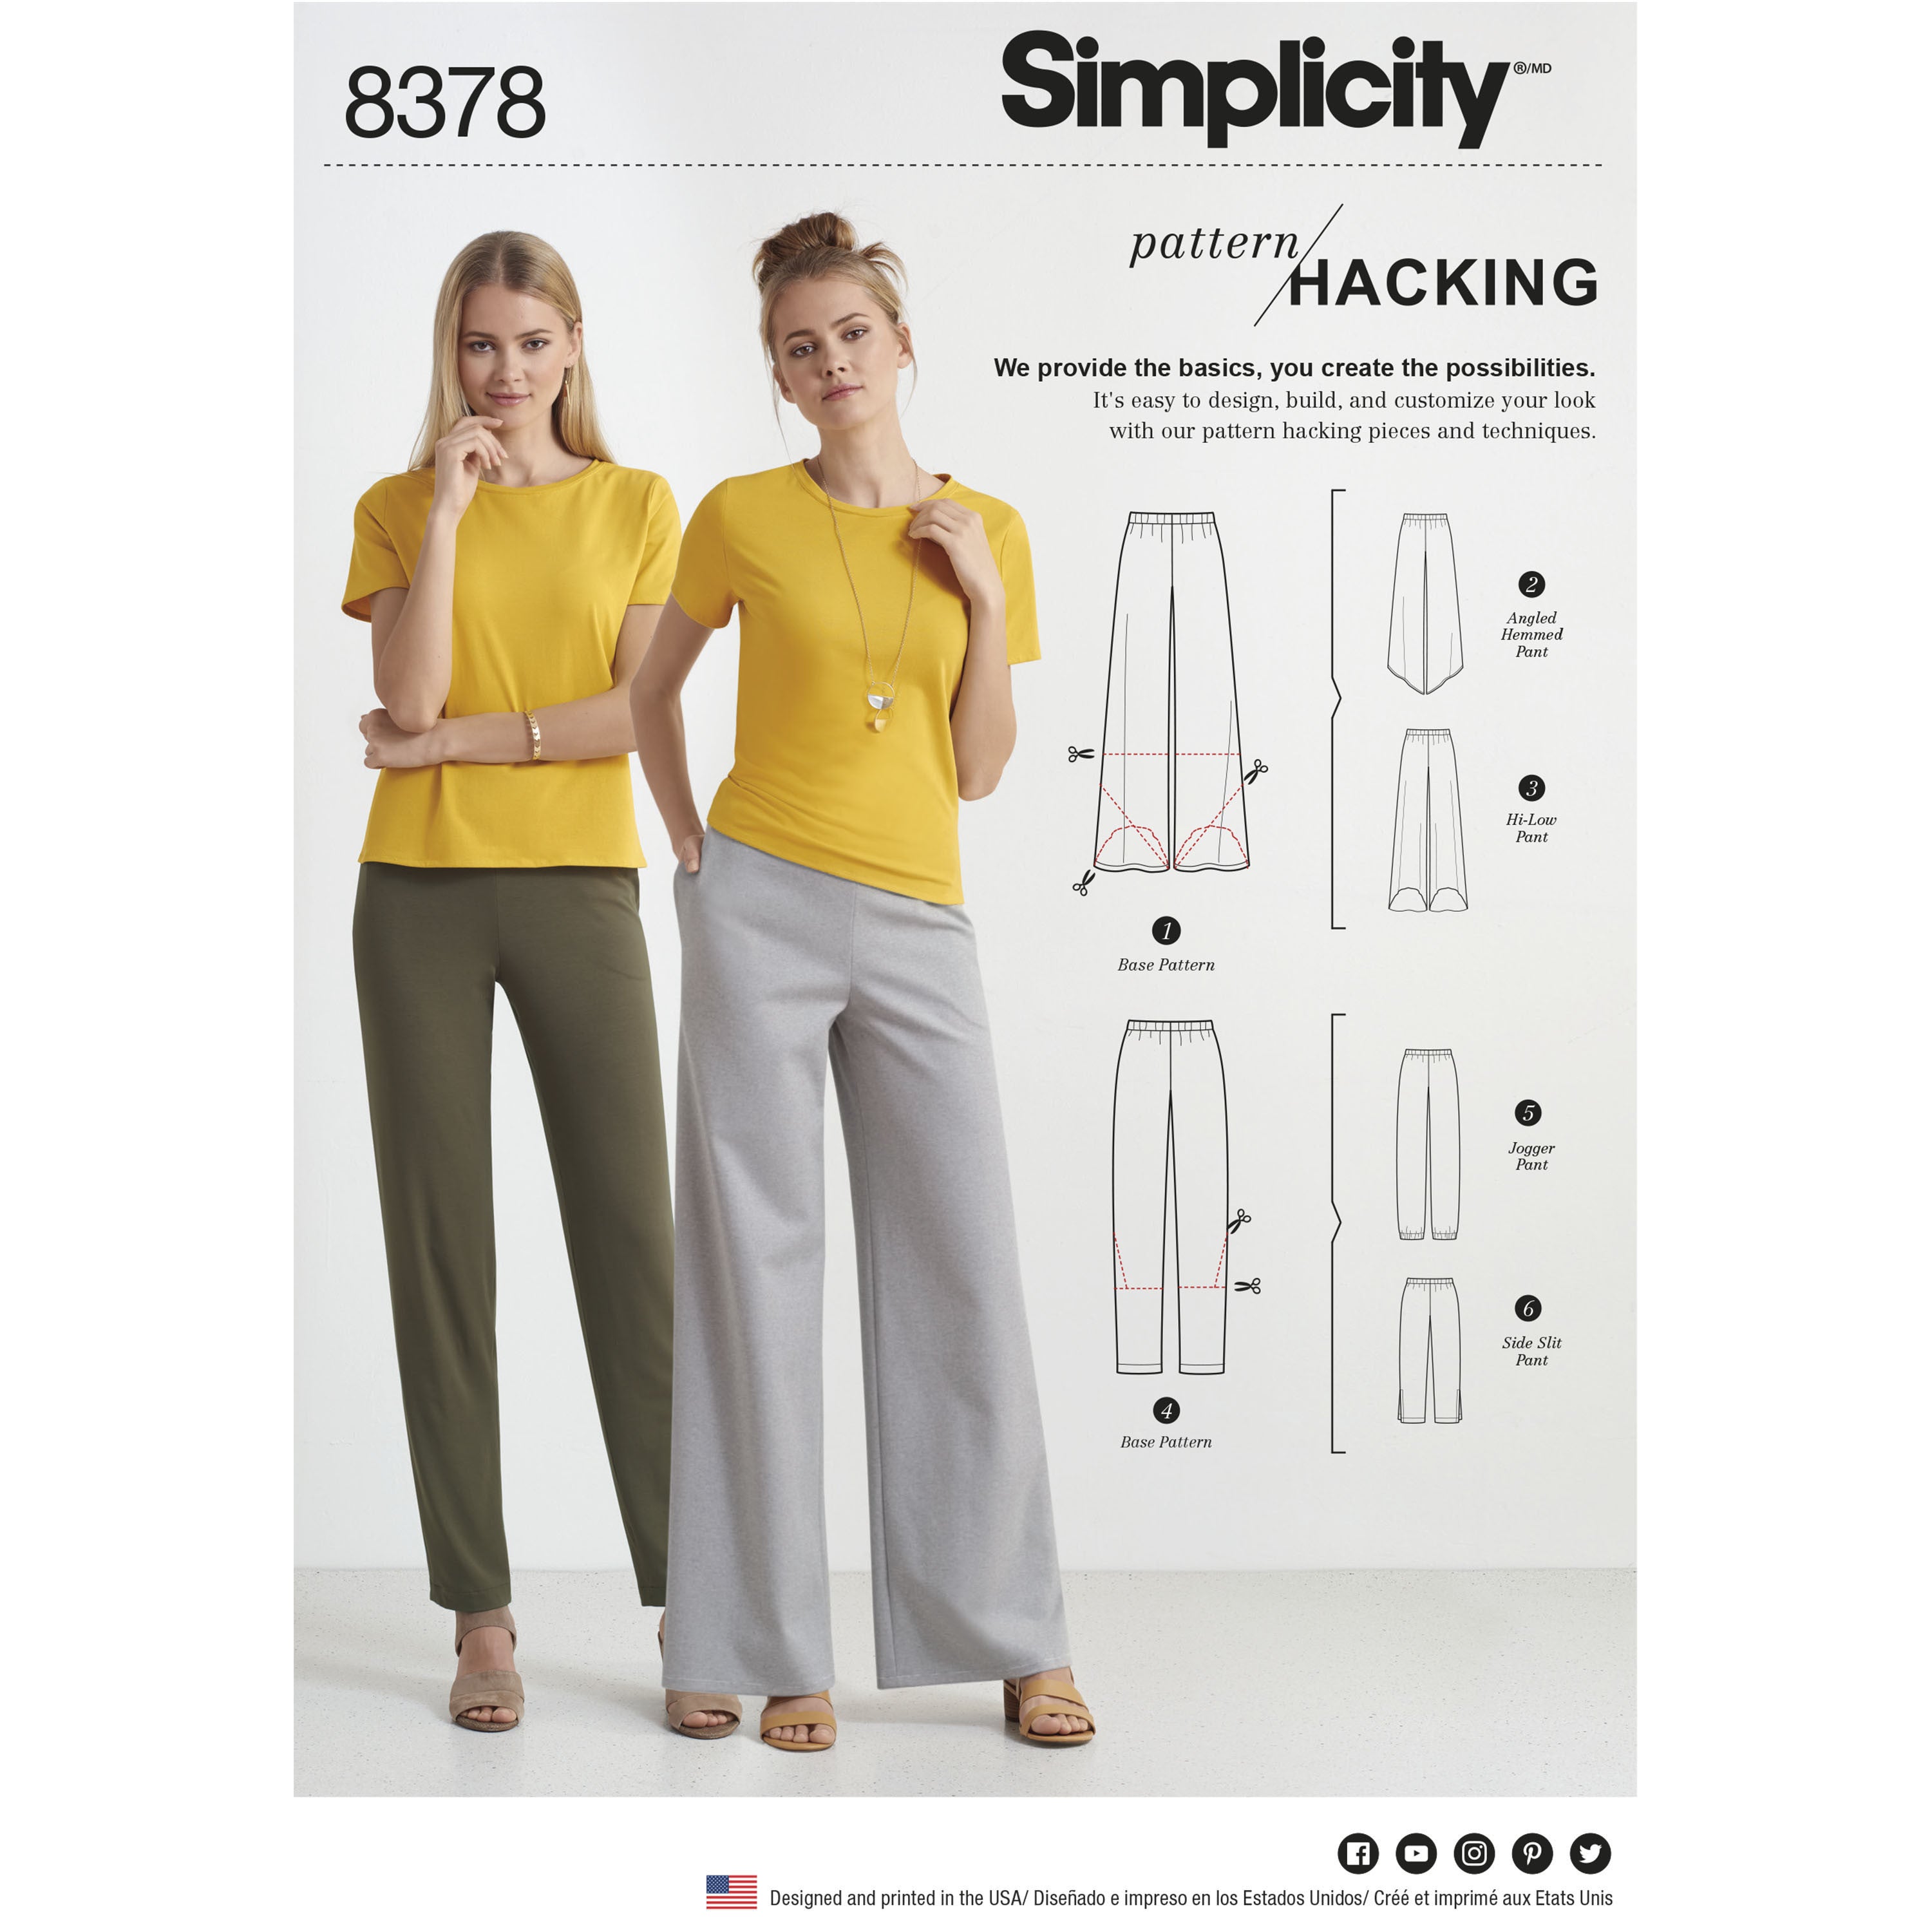 Simplicity Pattern 8378 Womenâ€™s Knit Pant with Two Leg Widths from Jaycotts Sewing Supplies